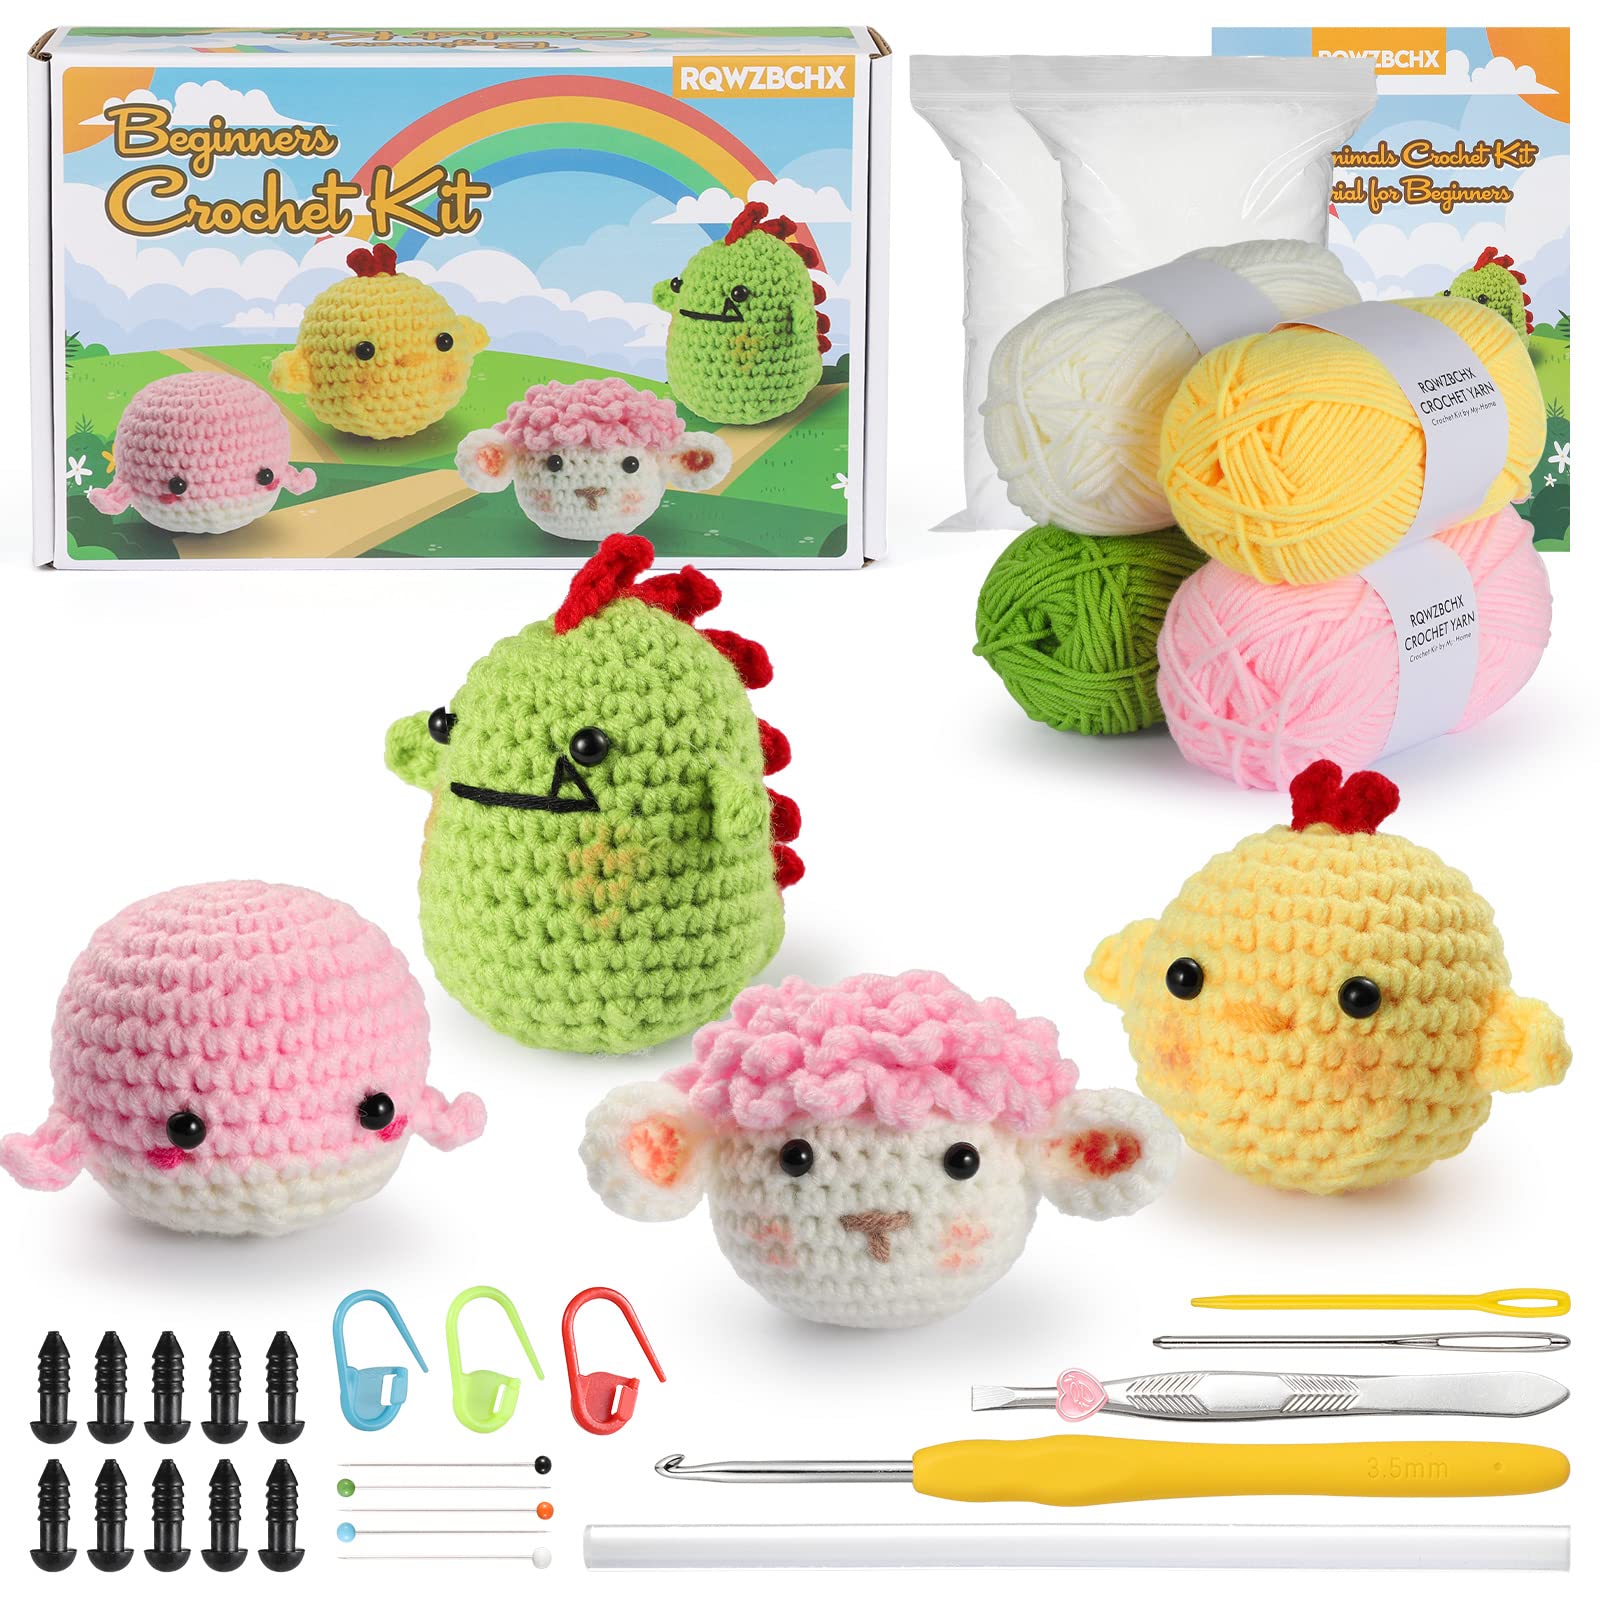 4PCS DIY Animal Crochet Kit with Step-by-Step Video Tutorials